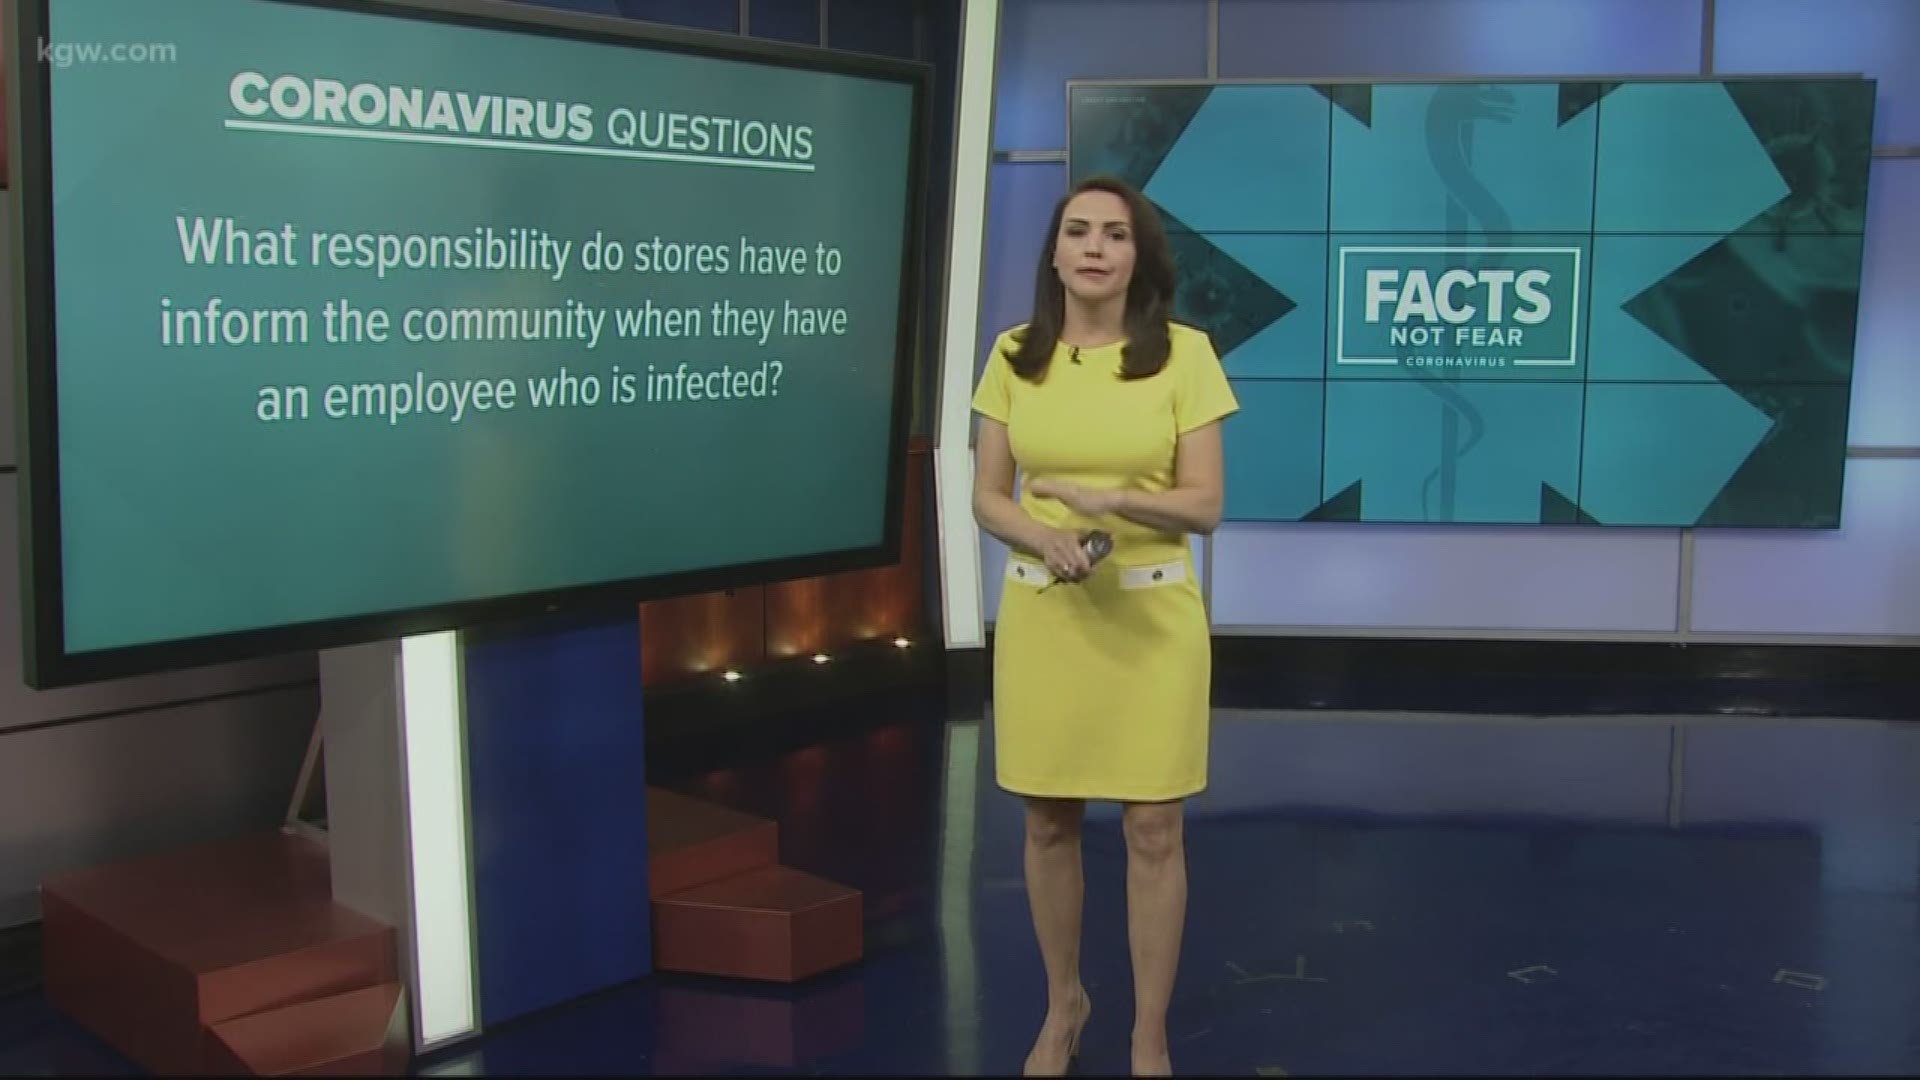 Here are answers to some of your most common coronavirus questions.